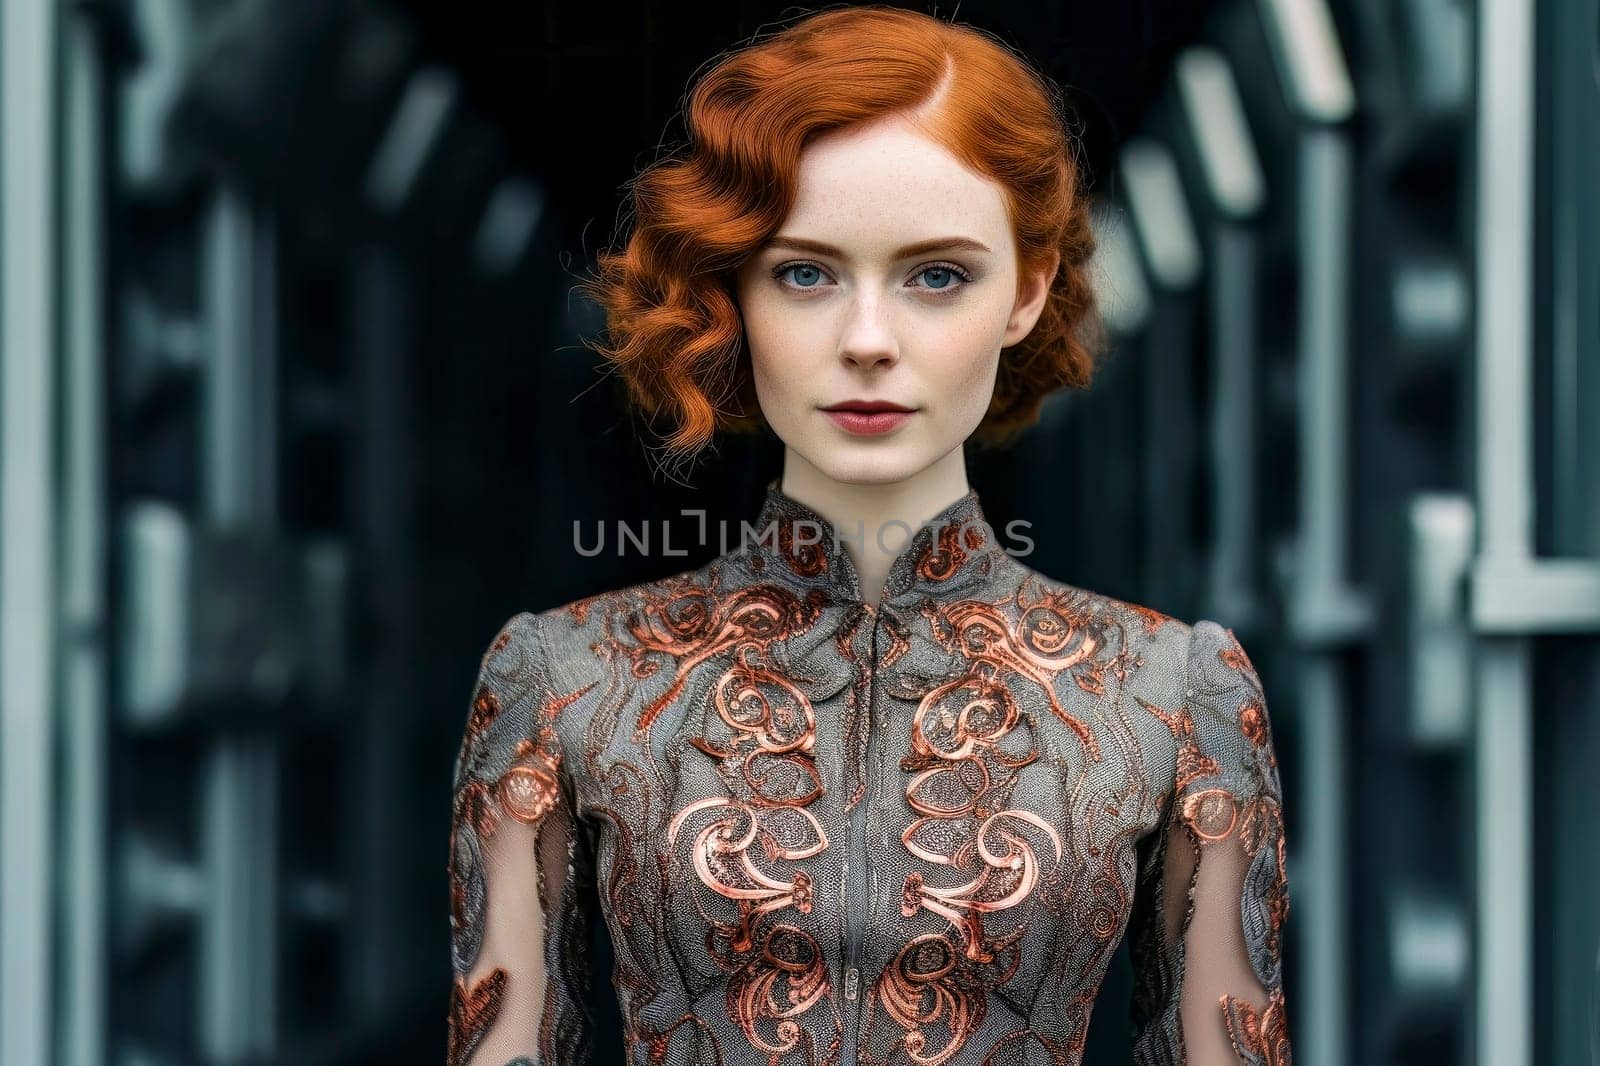 Captivating photo of a redhead girl dressed in exquisite 19th century clothing, exuding vintage charm and elegance